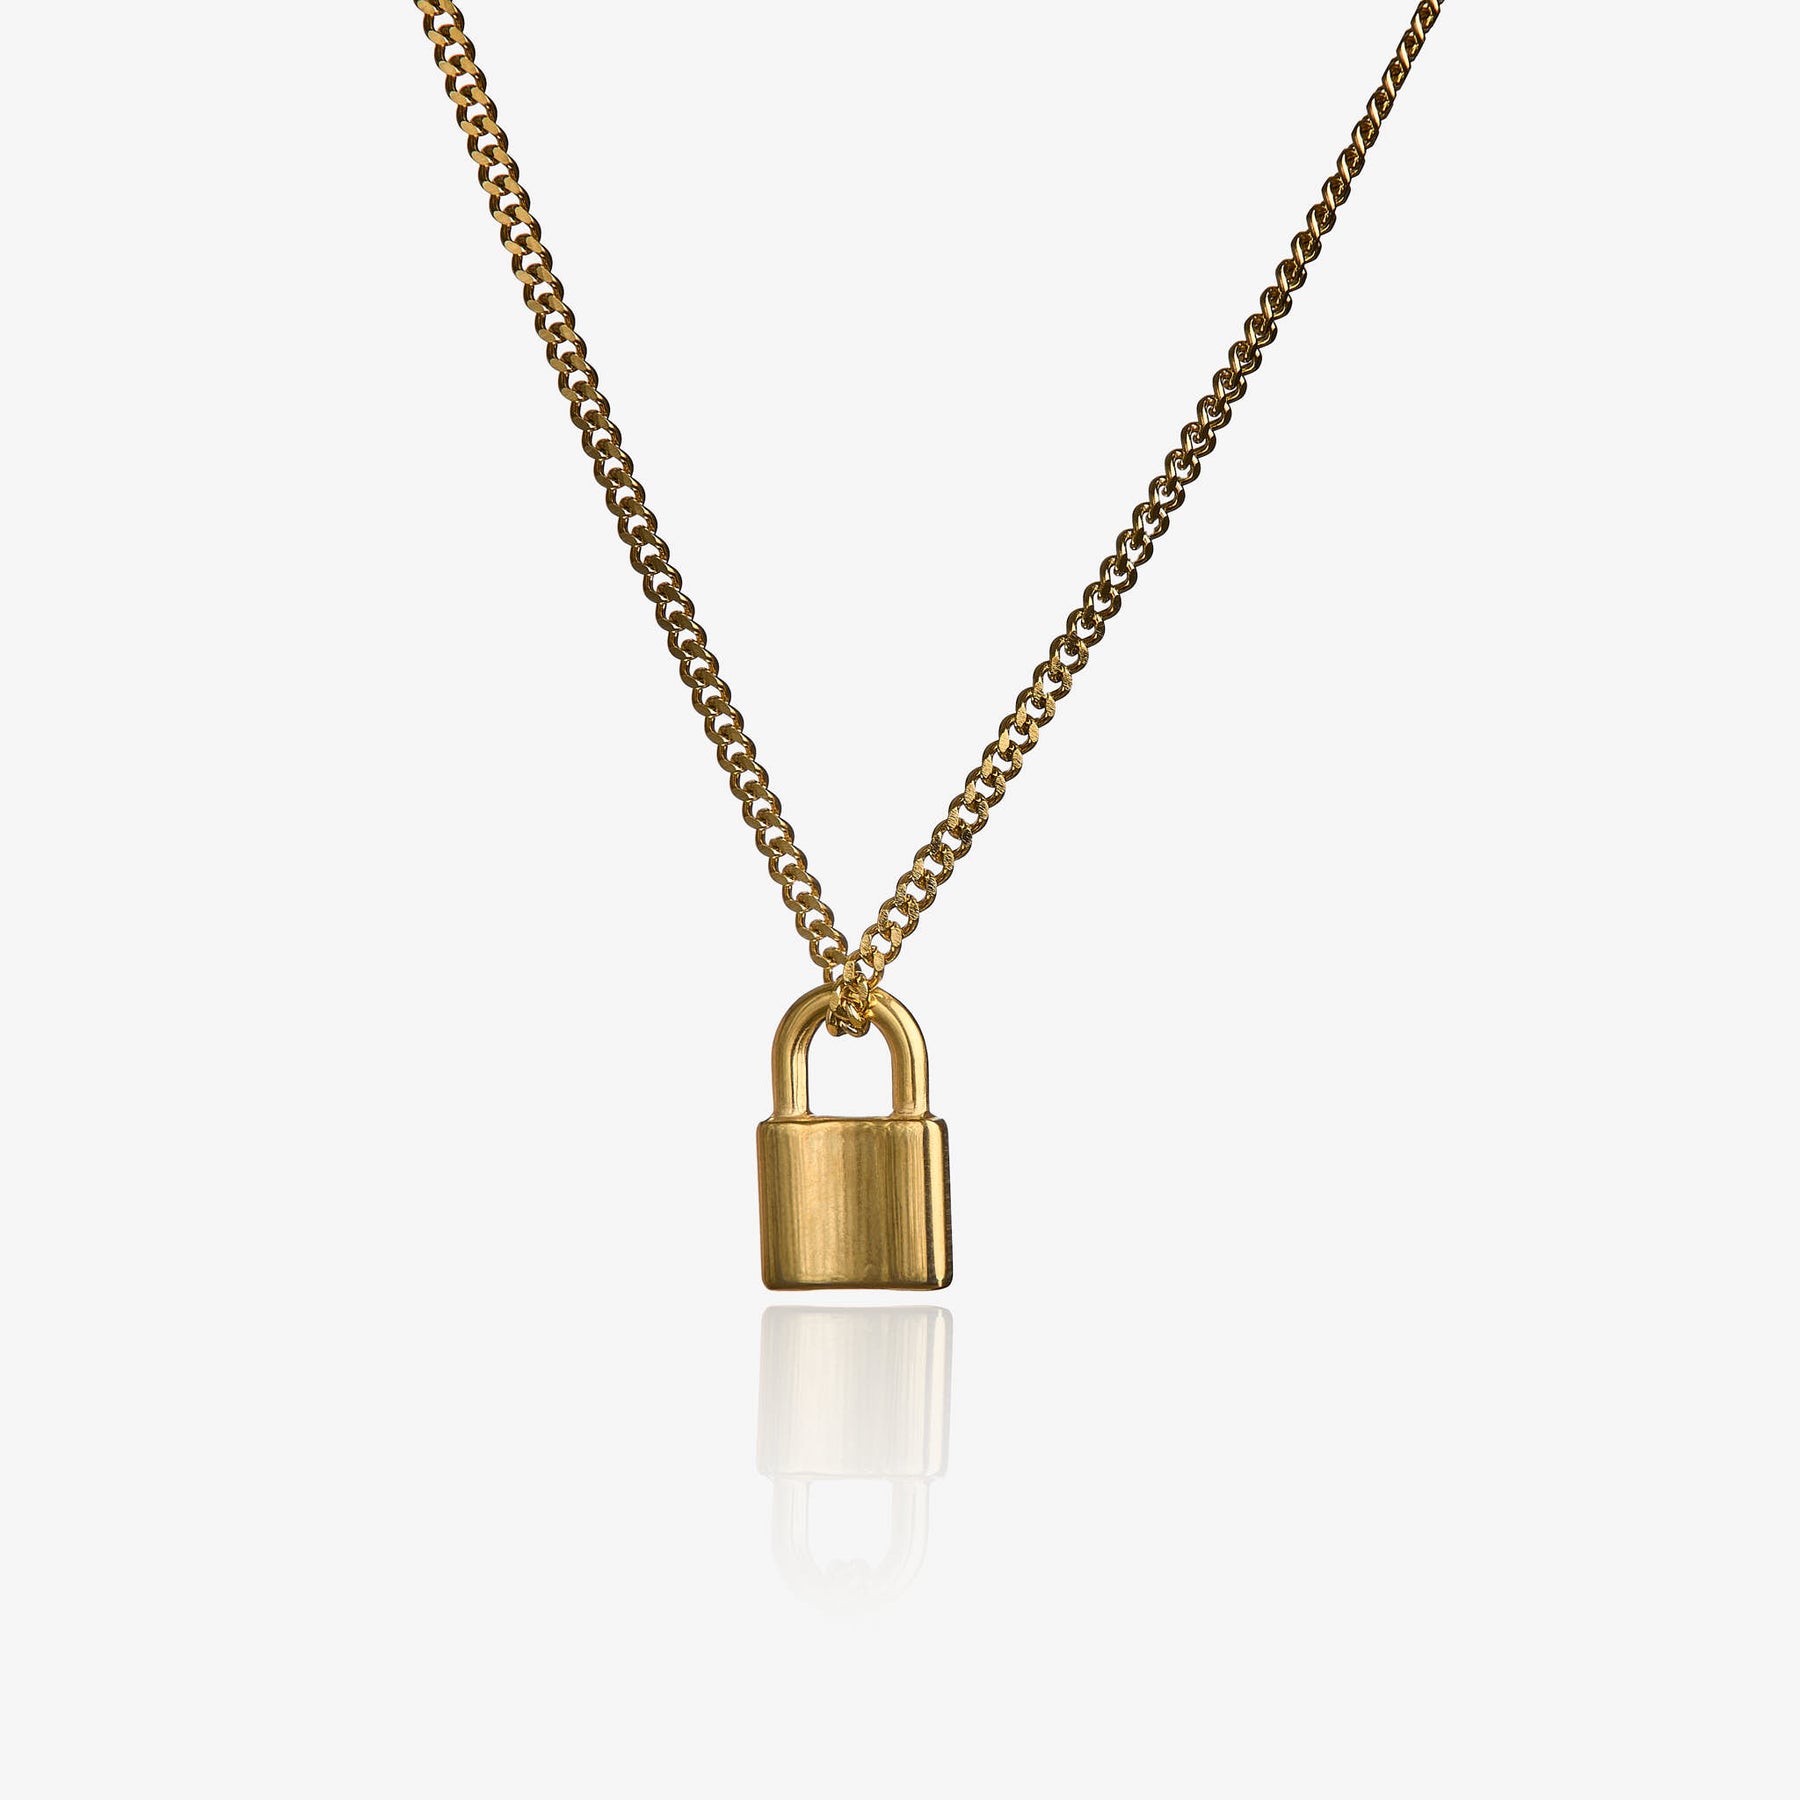 ON LOCK NECKLACE – CITY OF GOLD